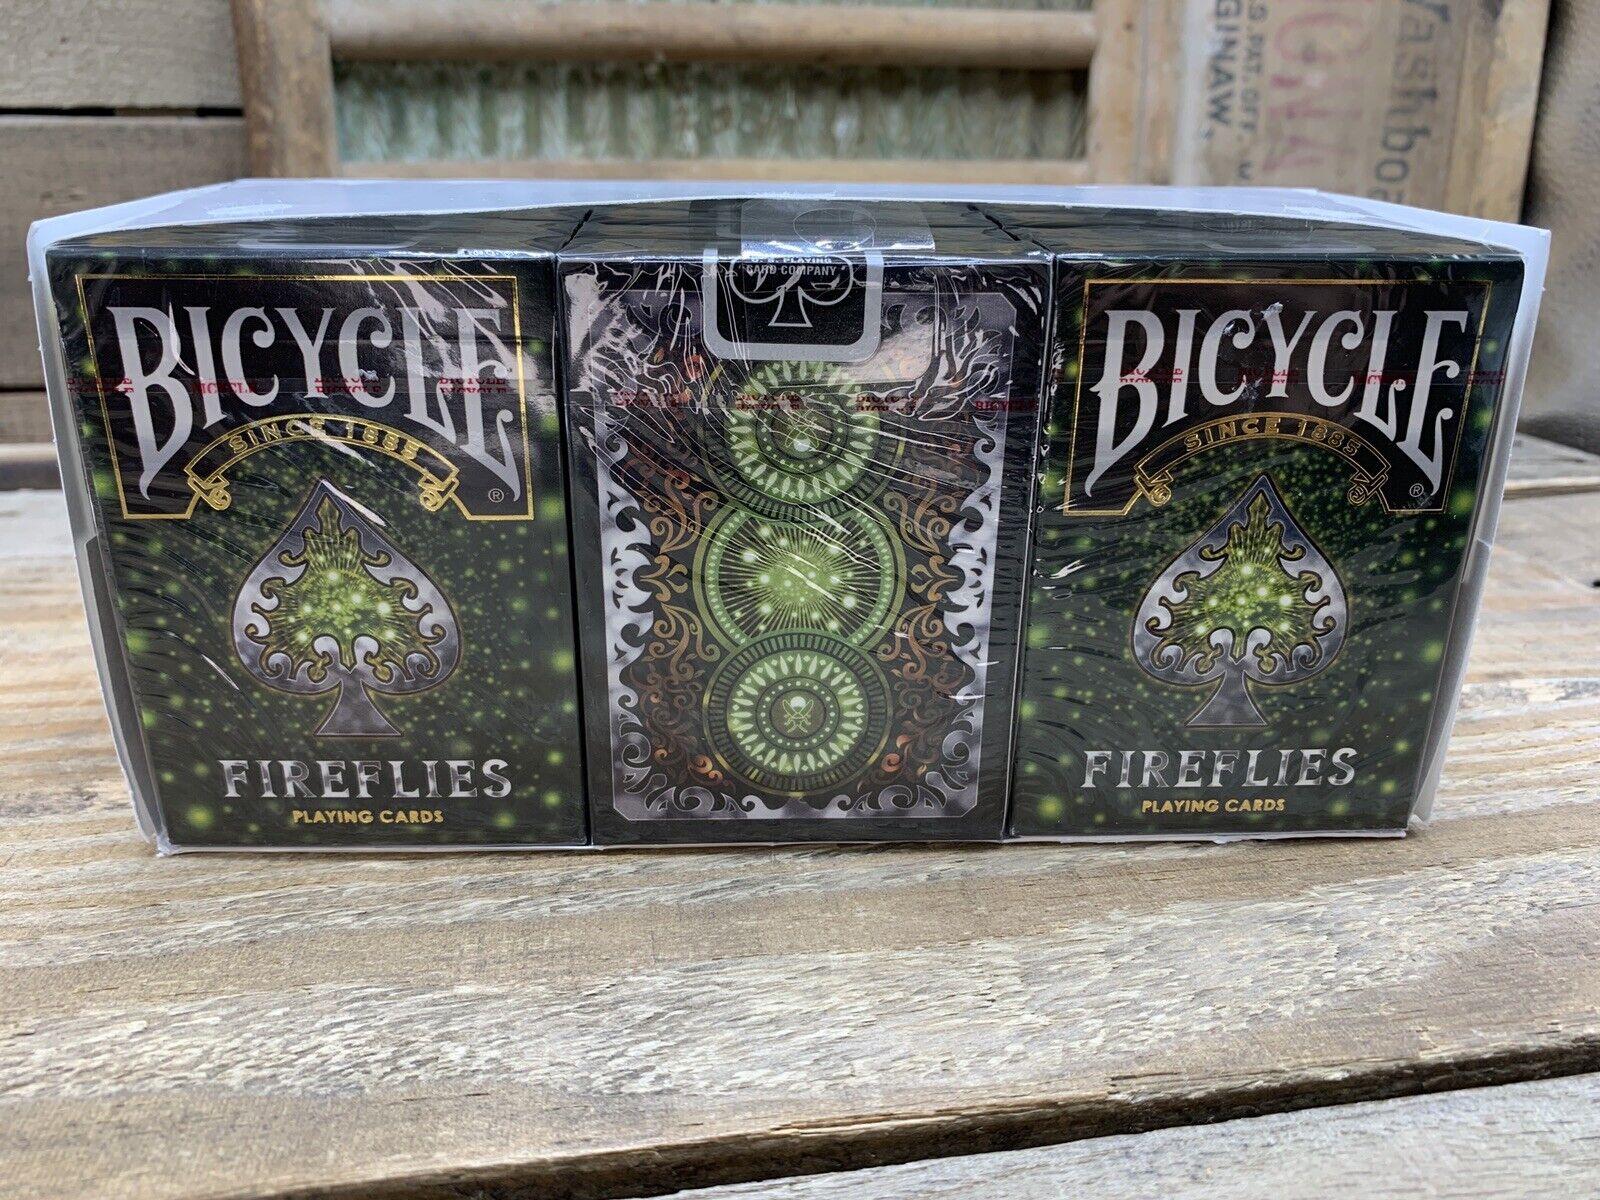 Lot Of 12 Sealed Bicycle Fireflies Playing Cards Poker Size Deck Limited Edition